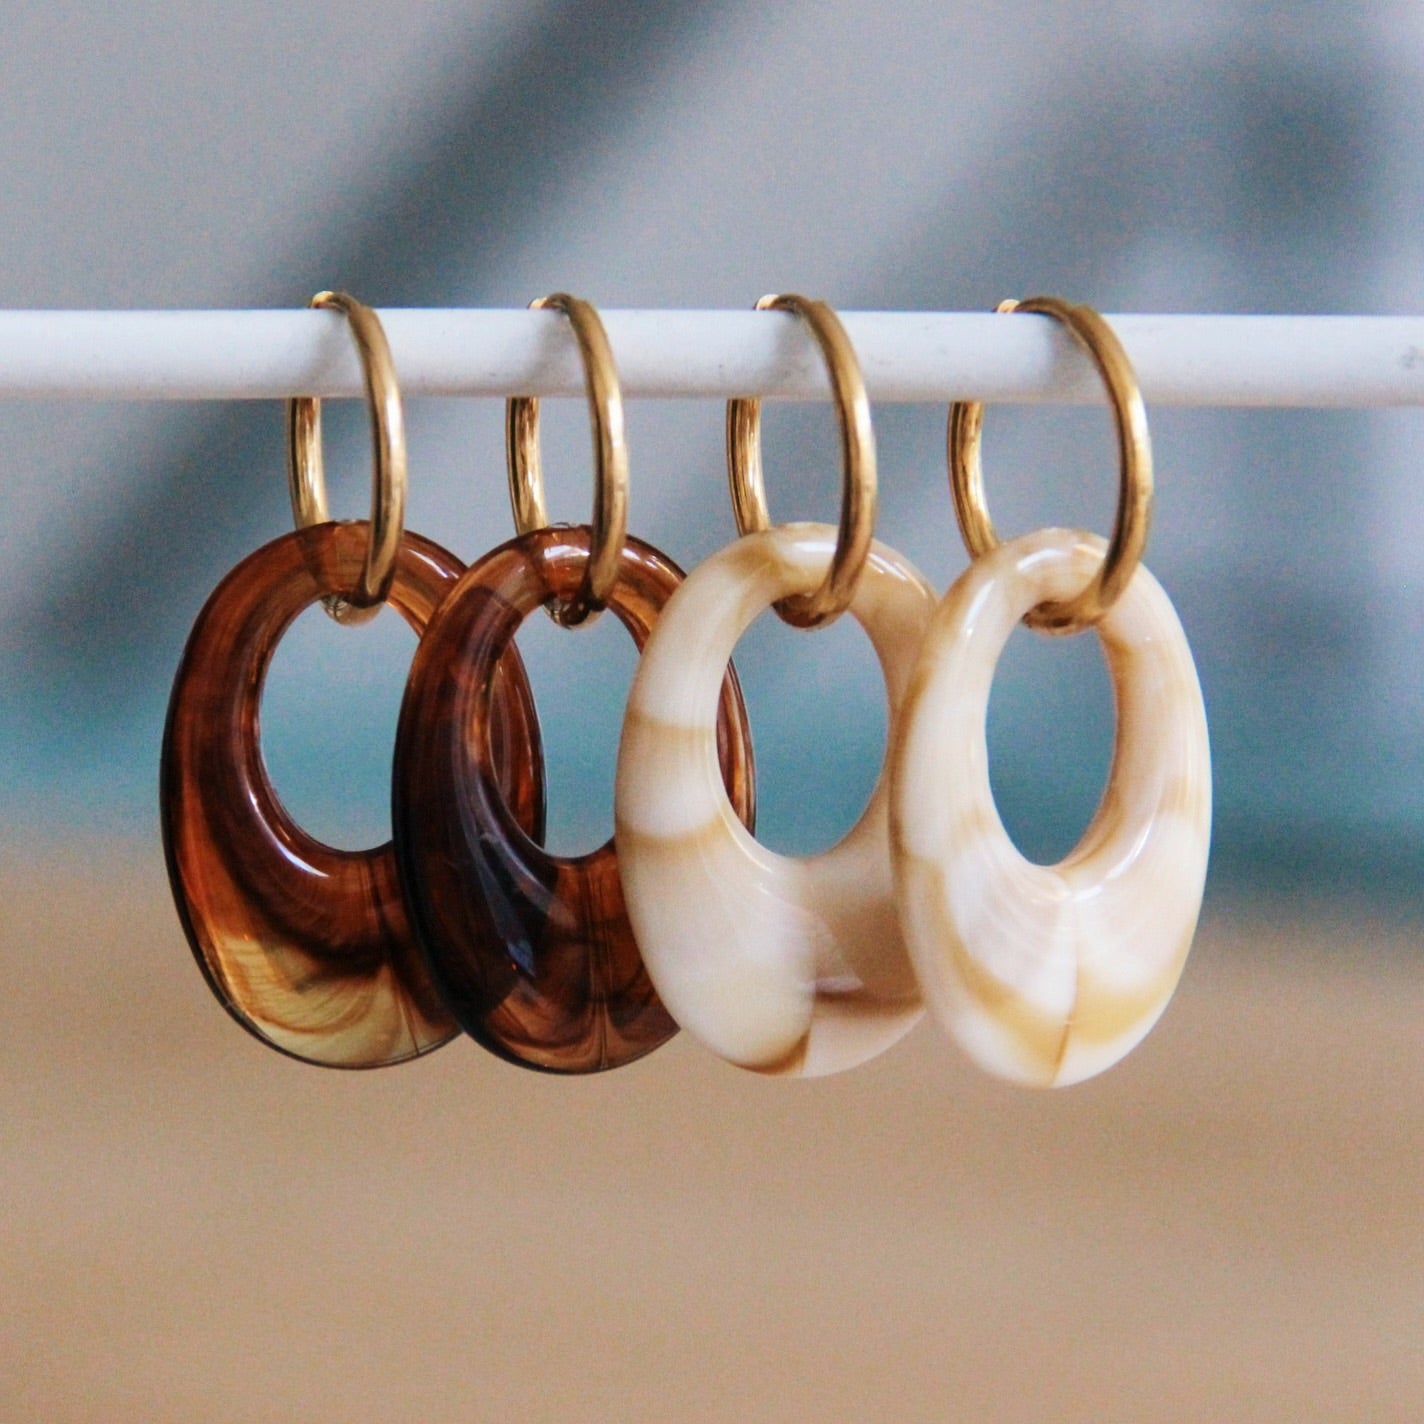 Stainless steel earring with resin drop  - Brown/Gold - SO707